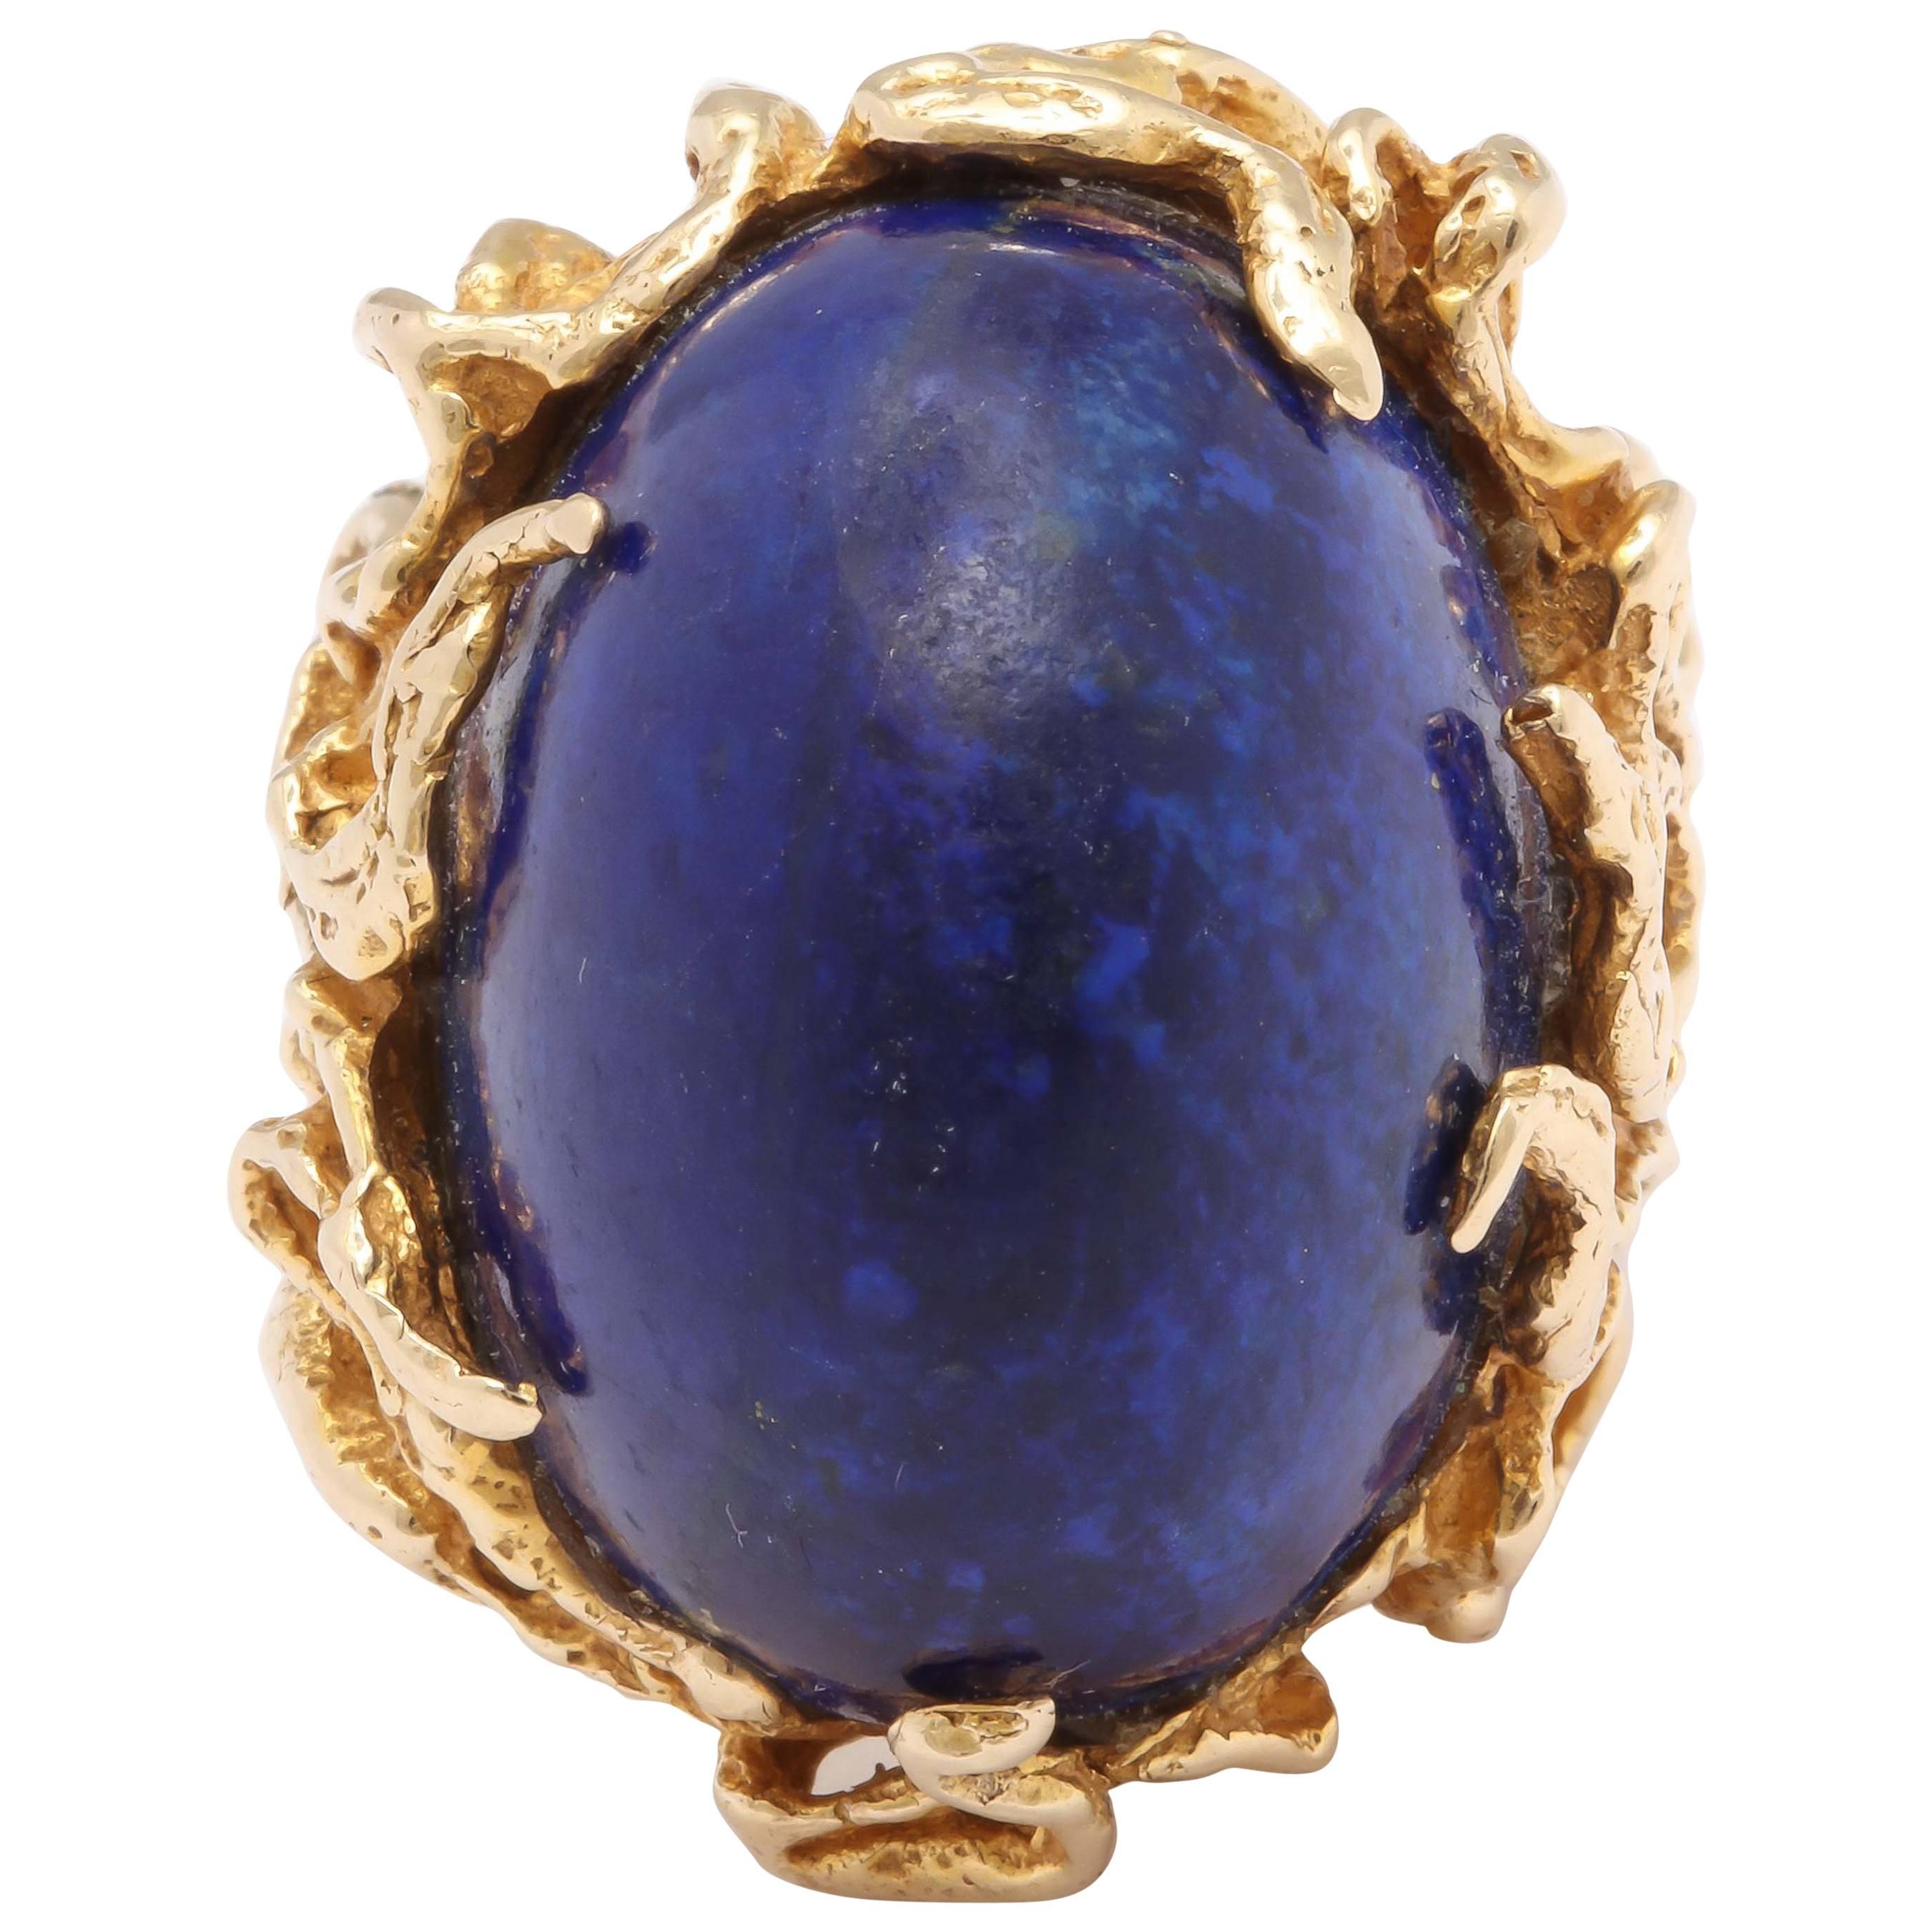 Oversize Oval Lapis Yellow Gold Ring in Naturalistic Branch Setting